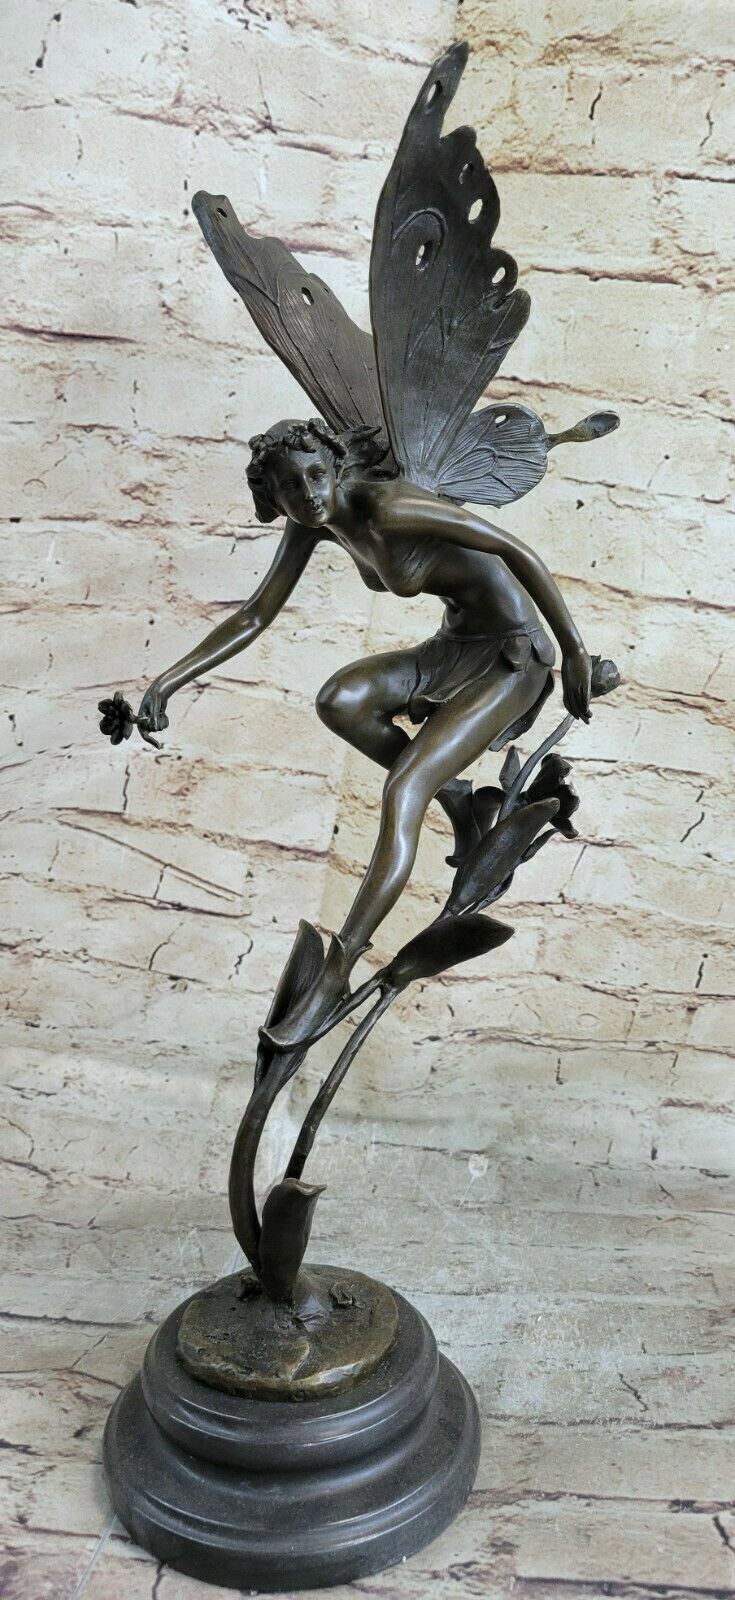 Nymph Fairy Chistmas Angel Bookend Bronze Marble Statue Sculpture Gift Artwork